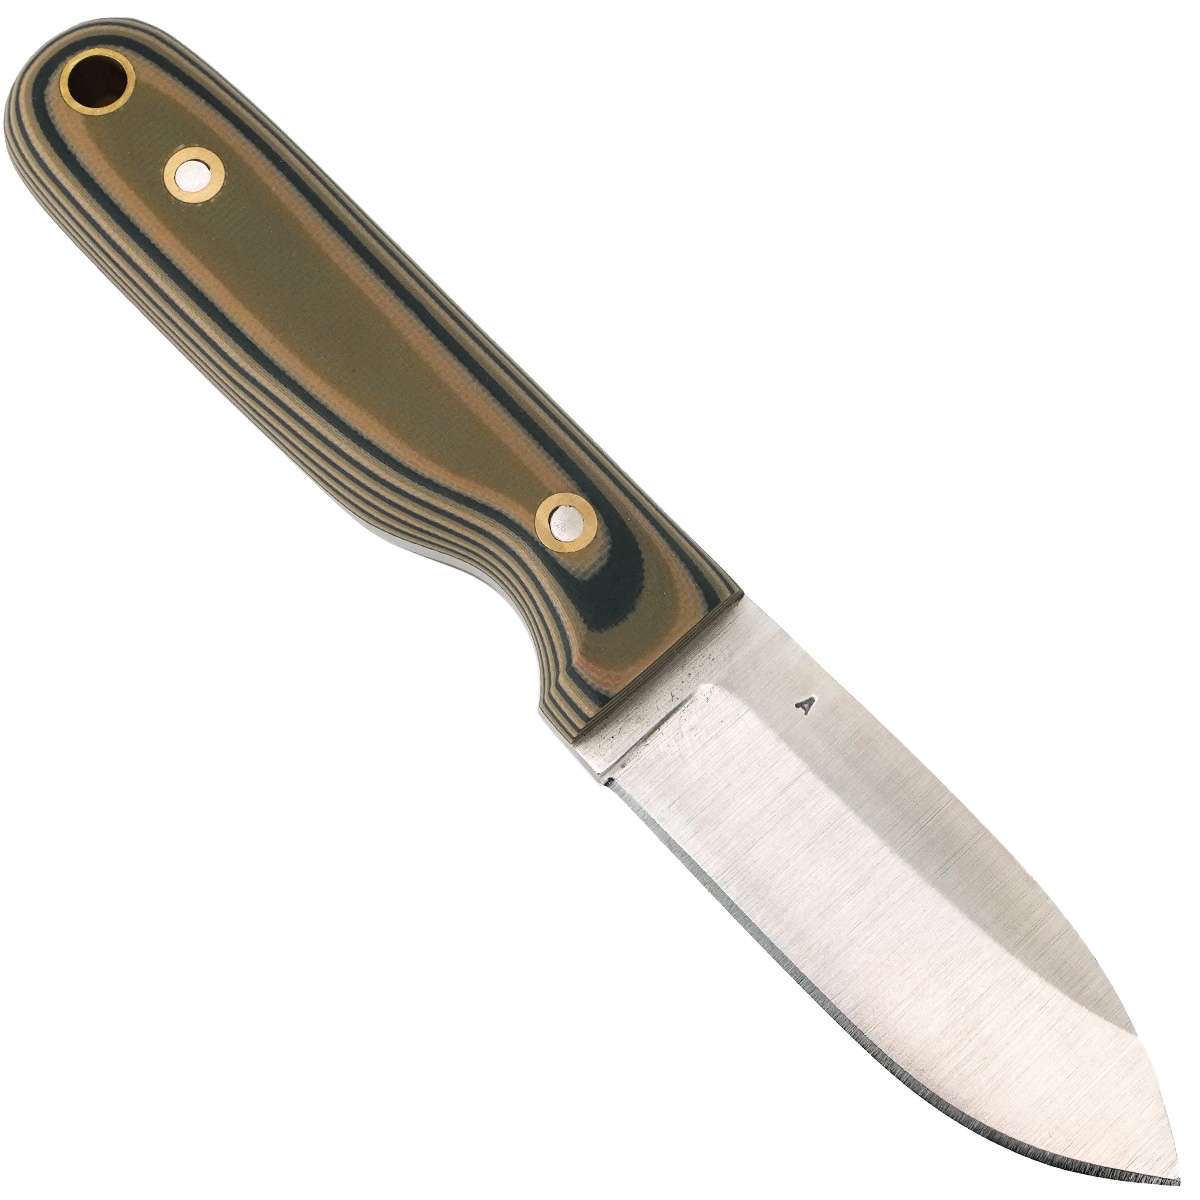 LT Wright Bushbaby Knife - Camo G10 Matte with Brown Leather Sheath